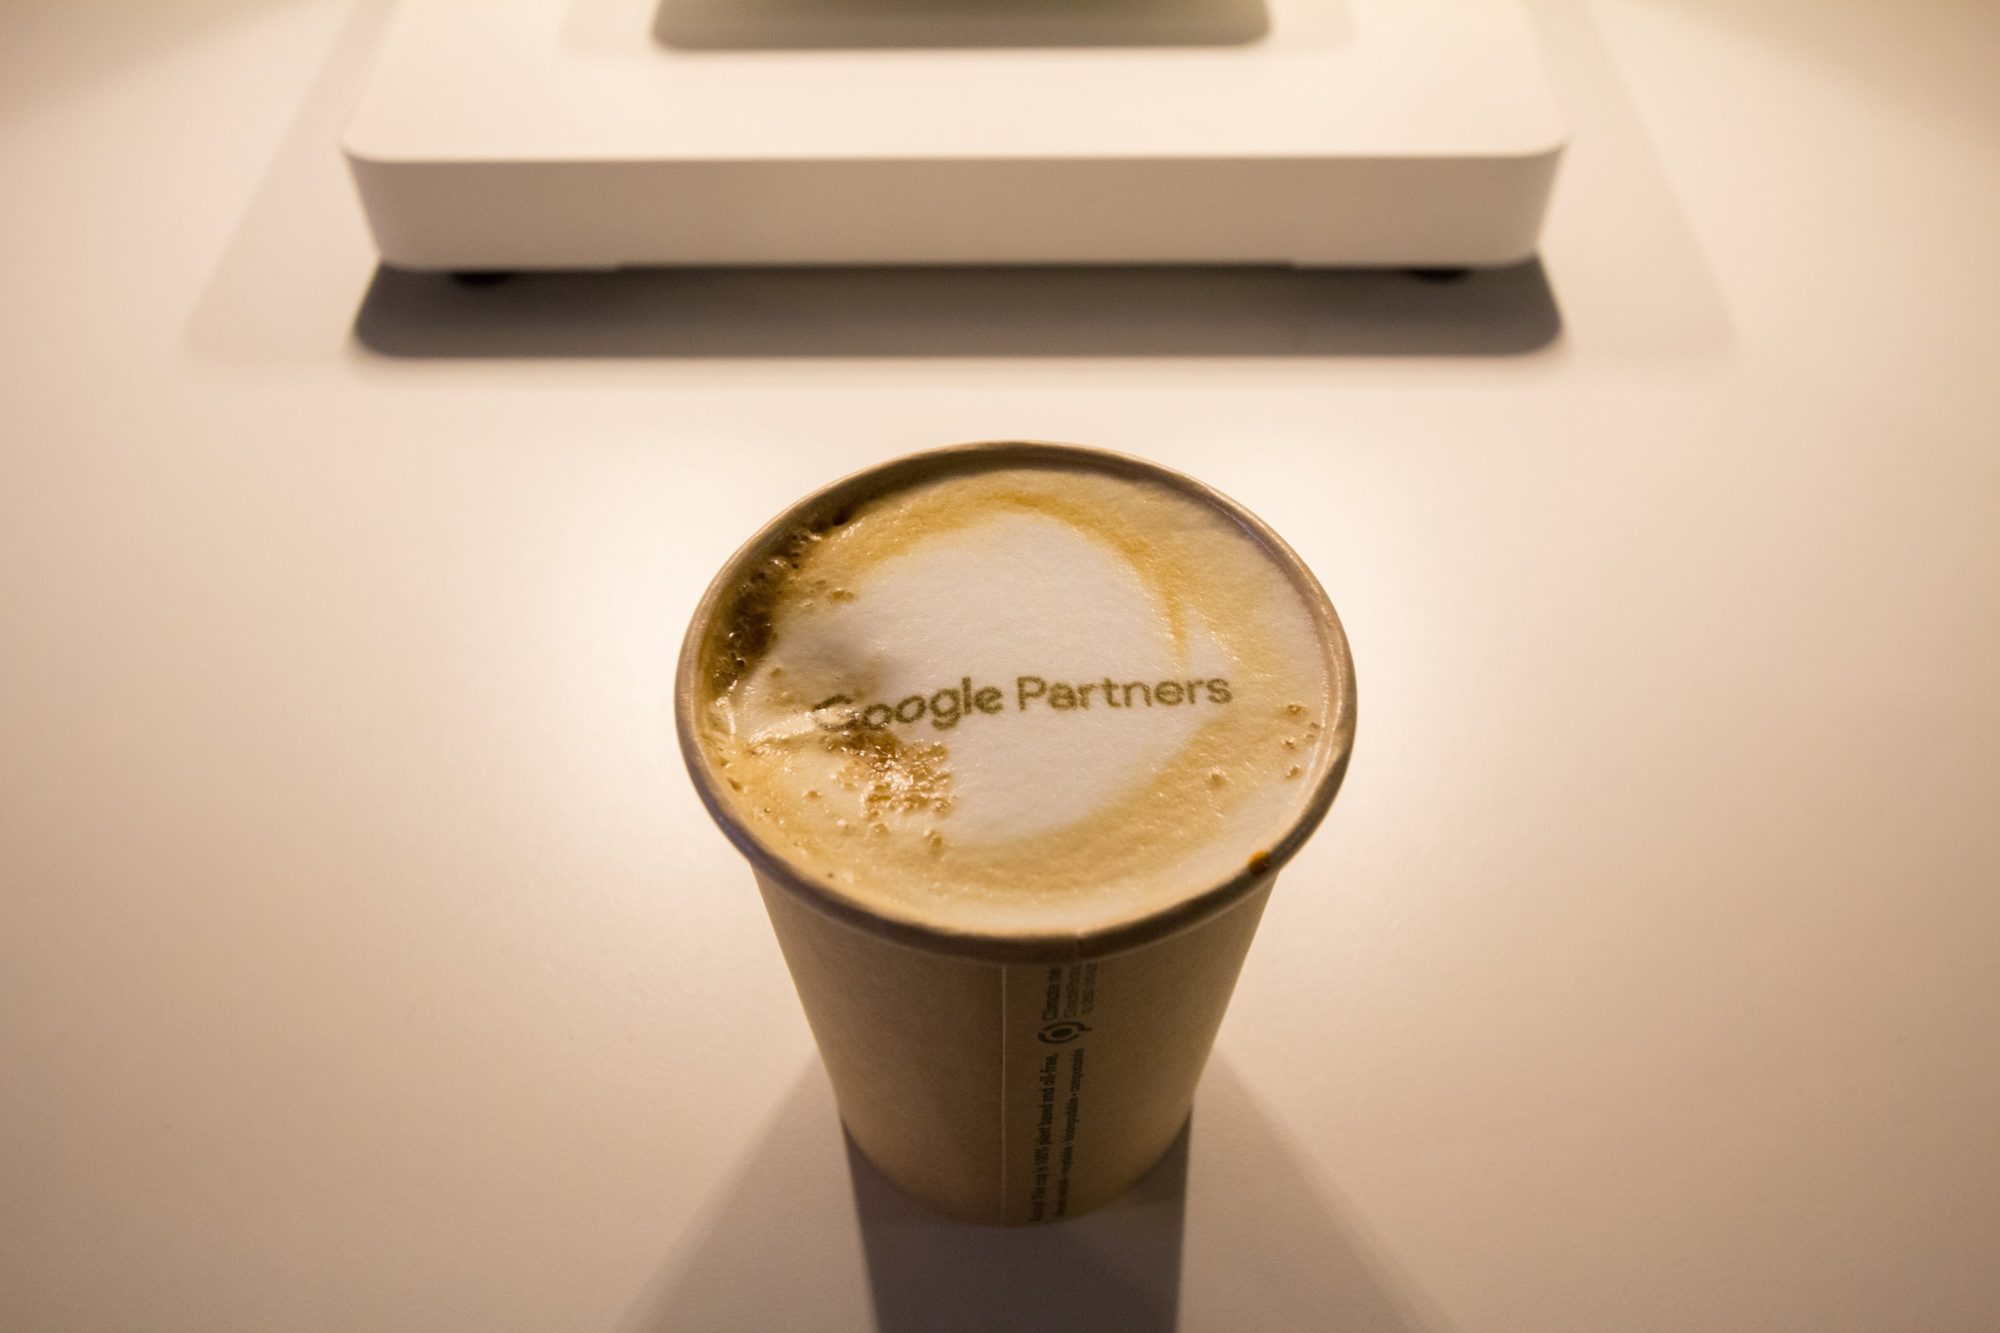 Google Partners Connect event coffee.